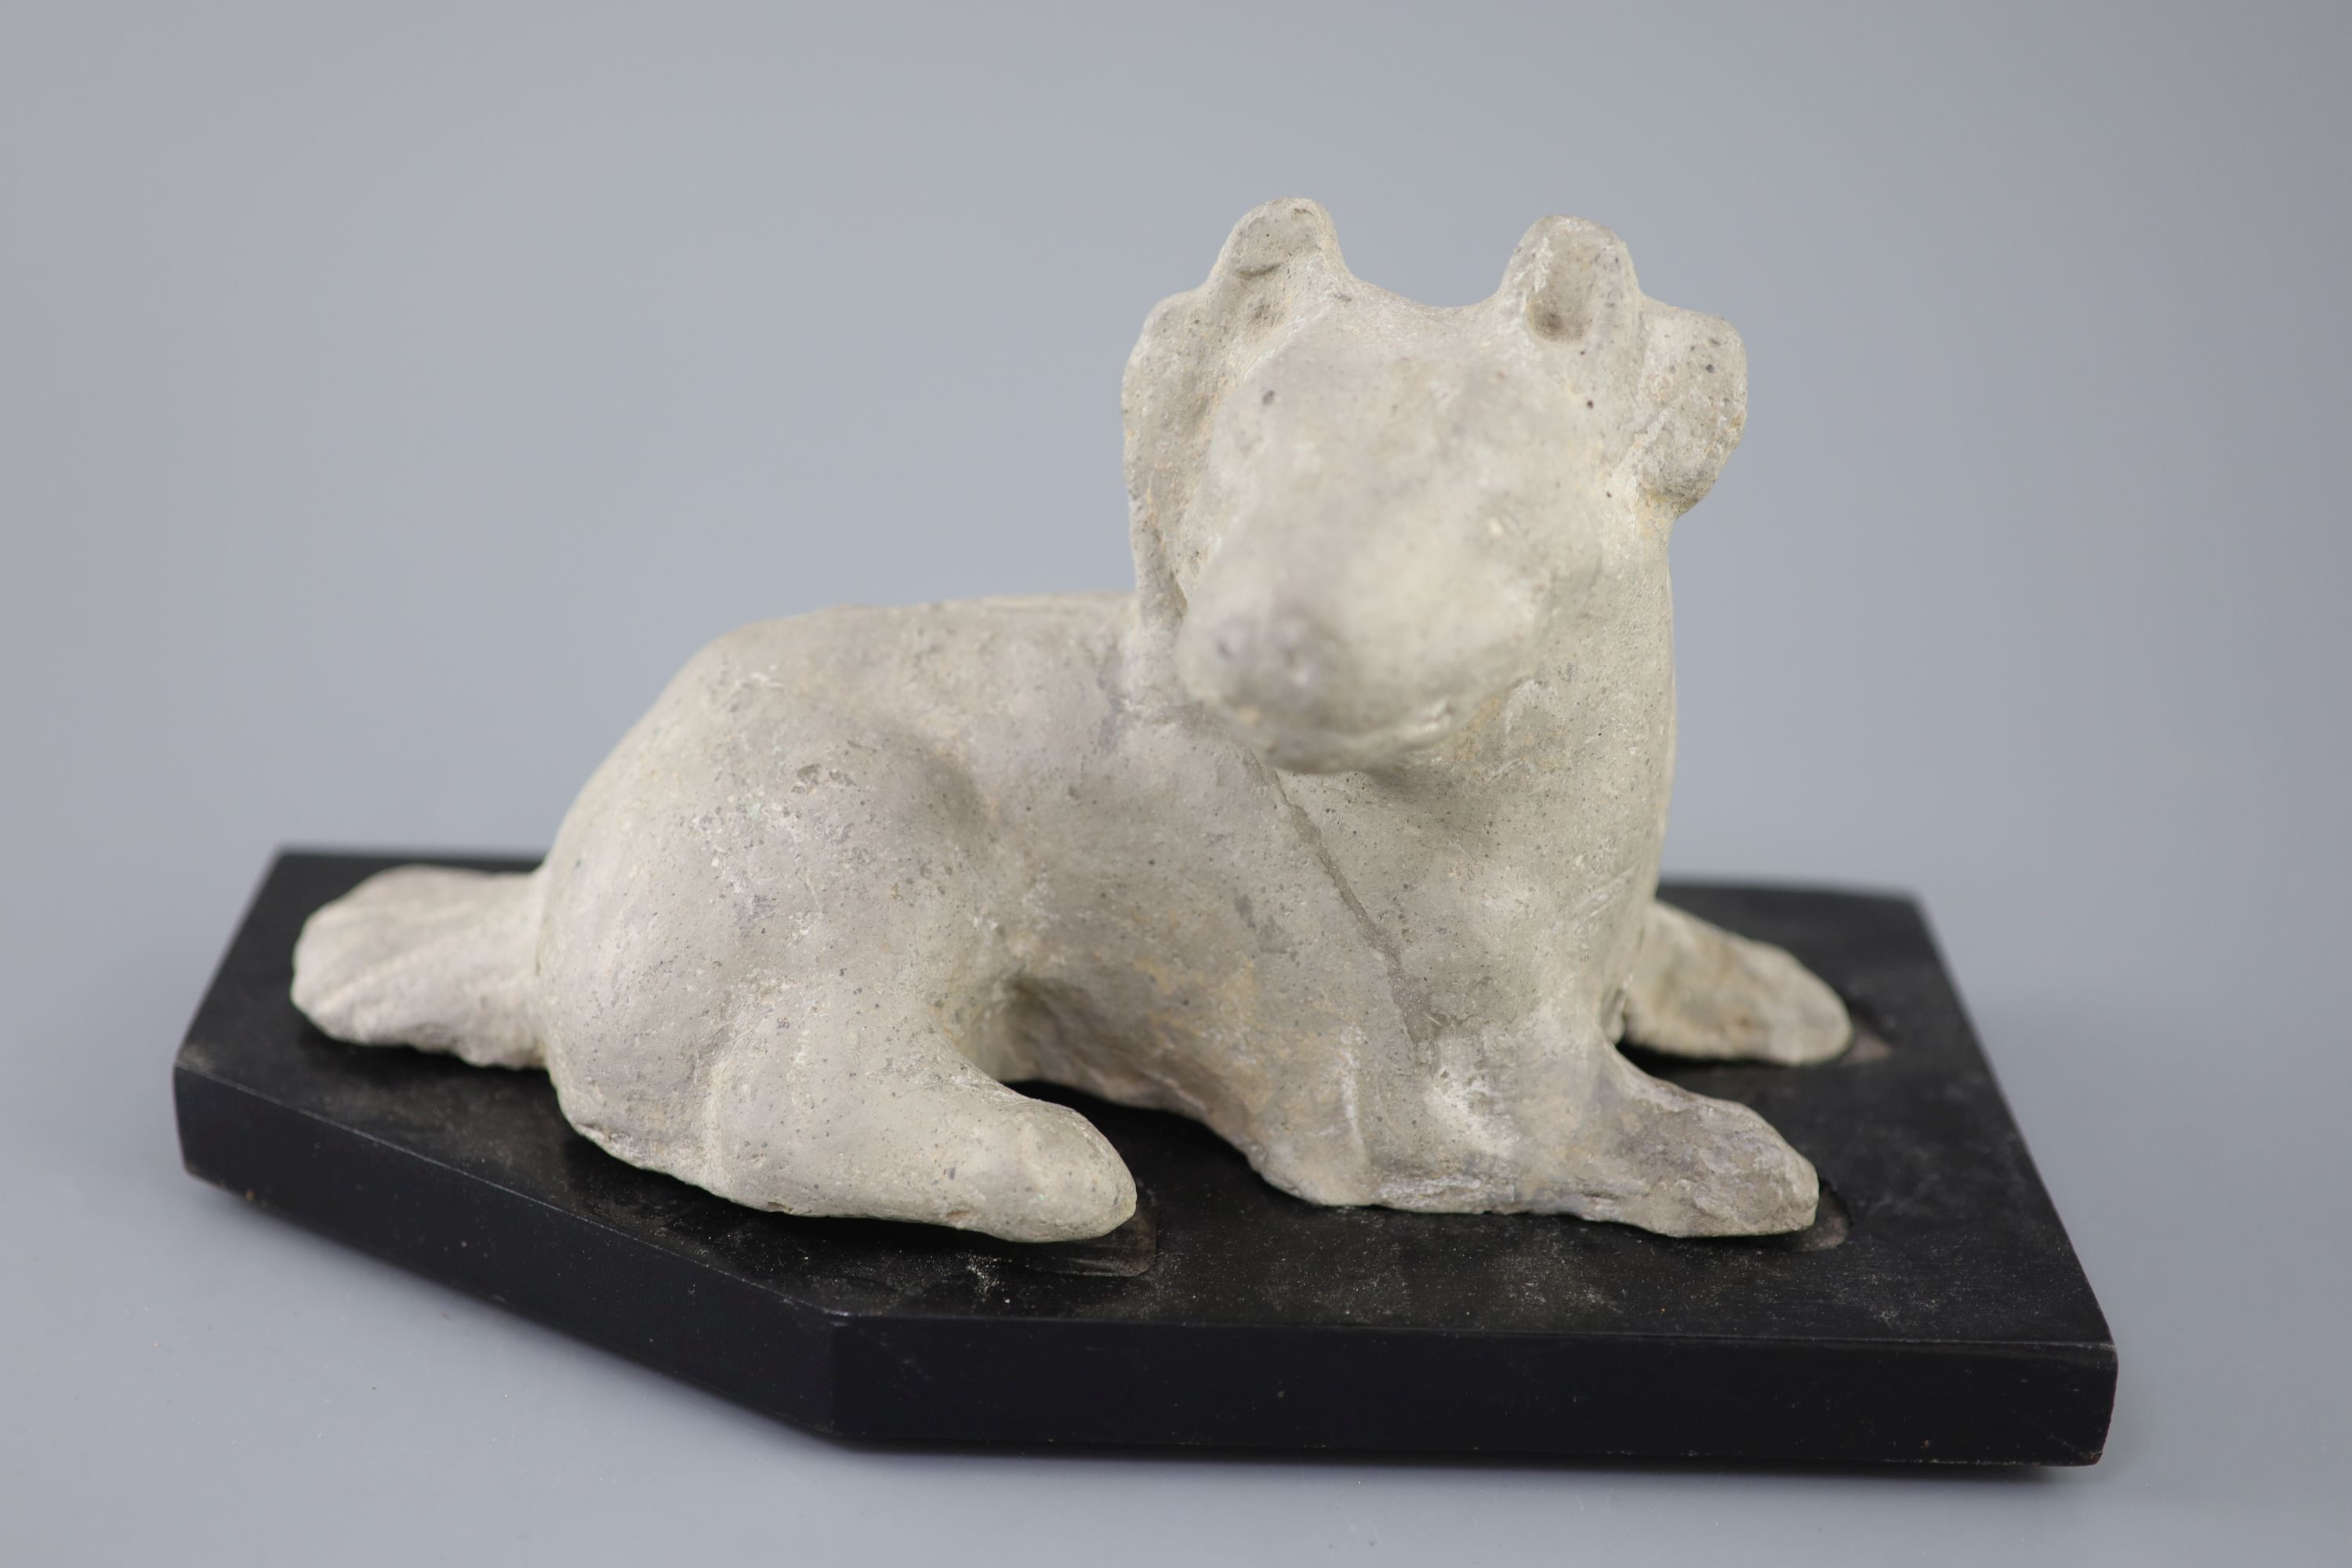 A Chinese grey pottery figure of a recumbent dog, Han dynasty or later 23.5cm long, wood stand